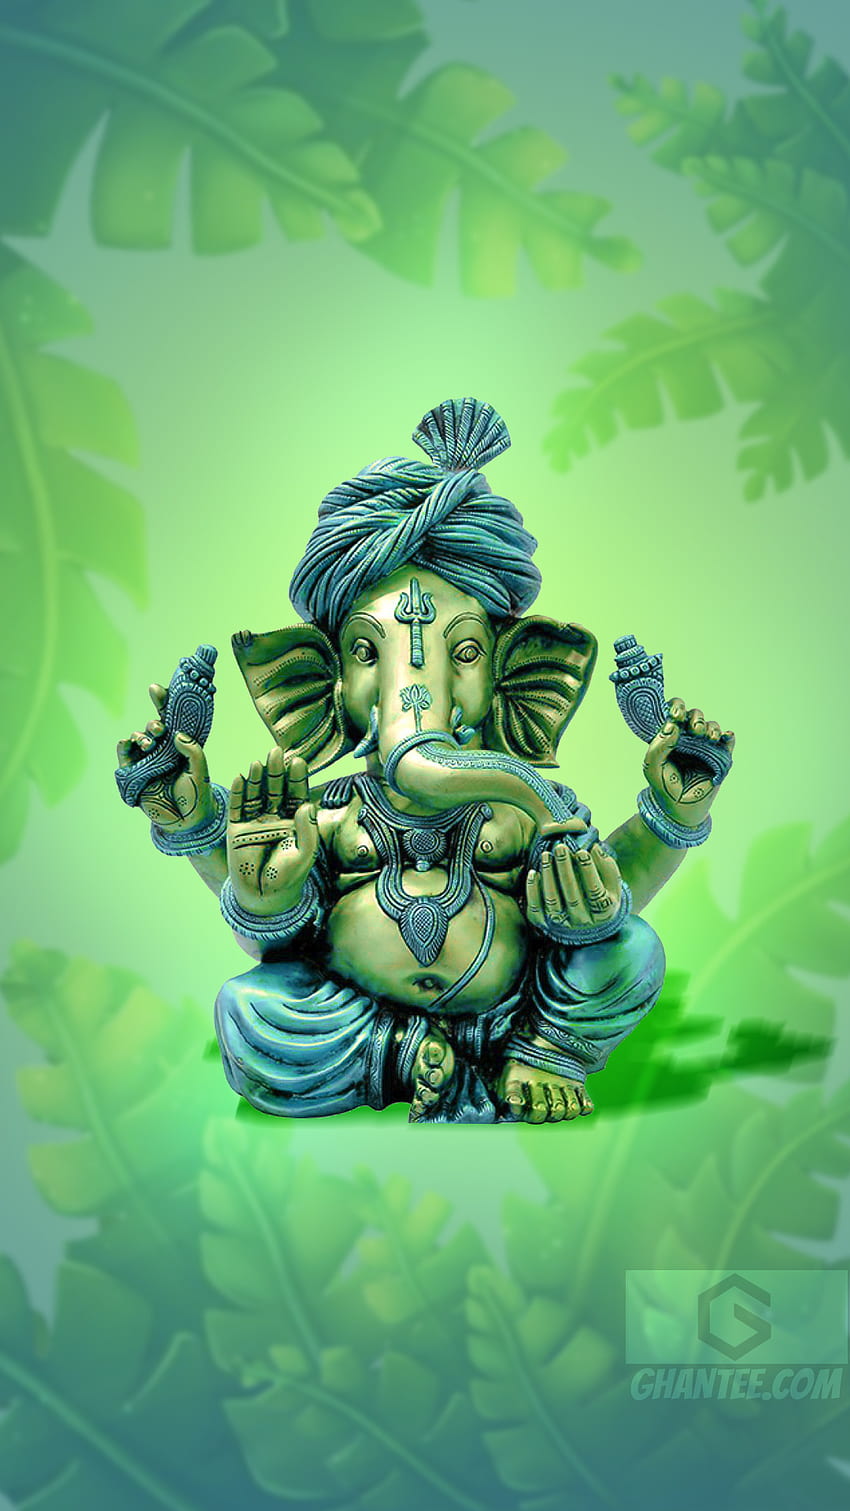 Color Solution Window Wallpaper Ganesh ji Wallpaper Wall Sticker for   Living Room Bedroom Hall Kids Room Play RoomSelf Adhesive VinylWater  Proof 24 x 18 Inch 3 sq ft  Amazonin Home Improvement